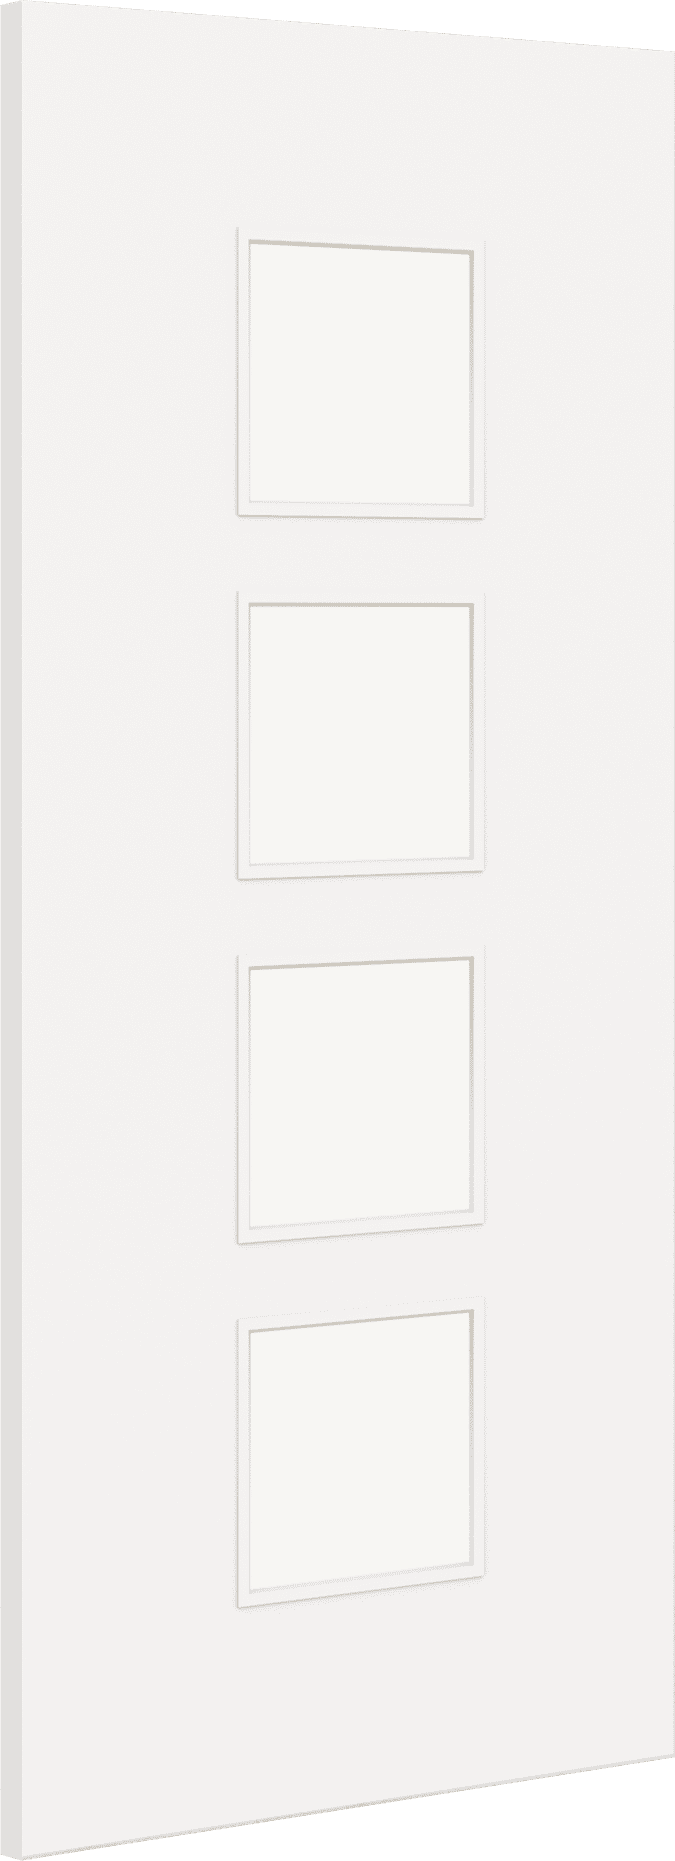 1981mm x 610mm x 44mm (24") Architectural Paint Grade White 09 Frosted Glazed Fire Door Blank